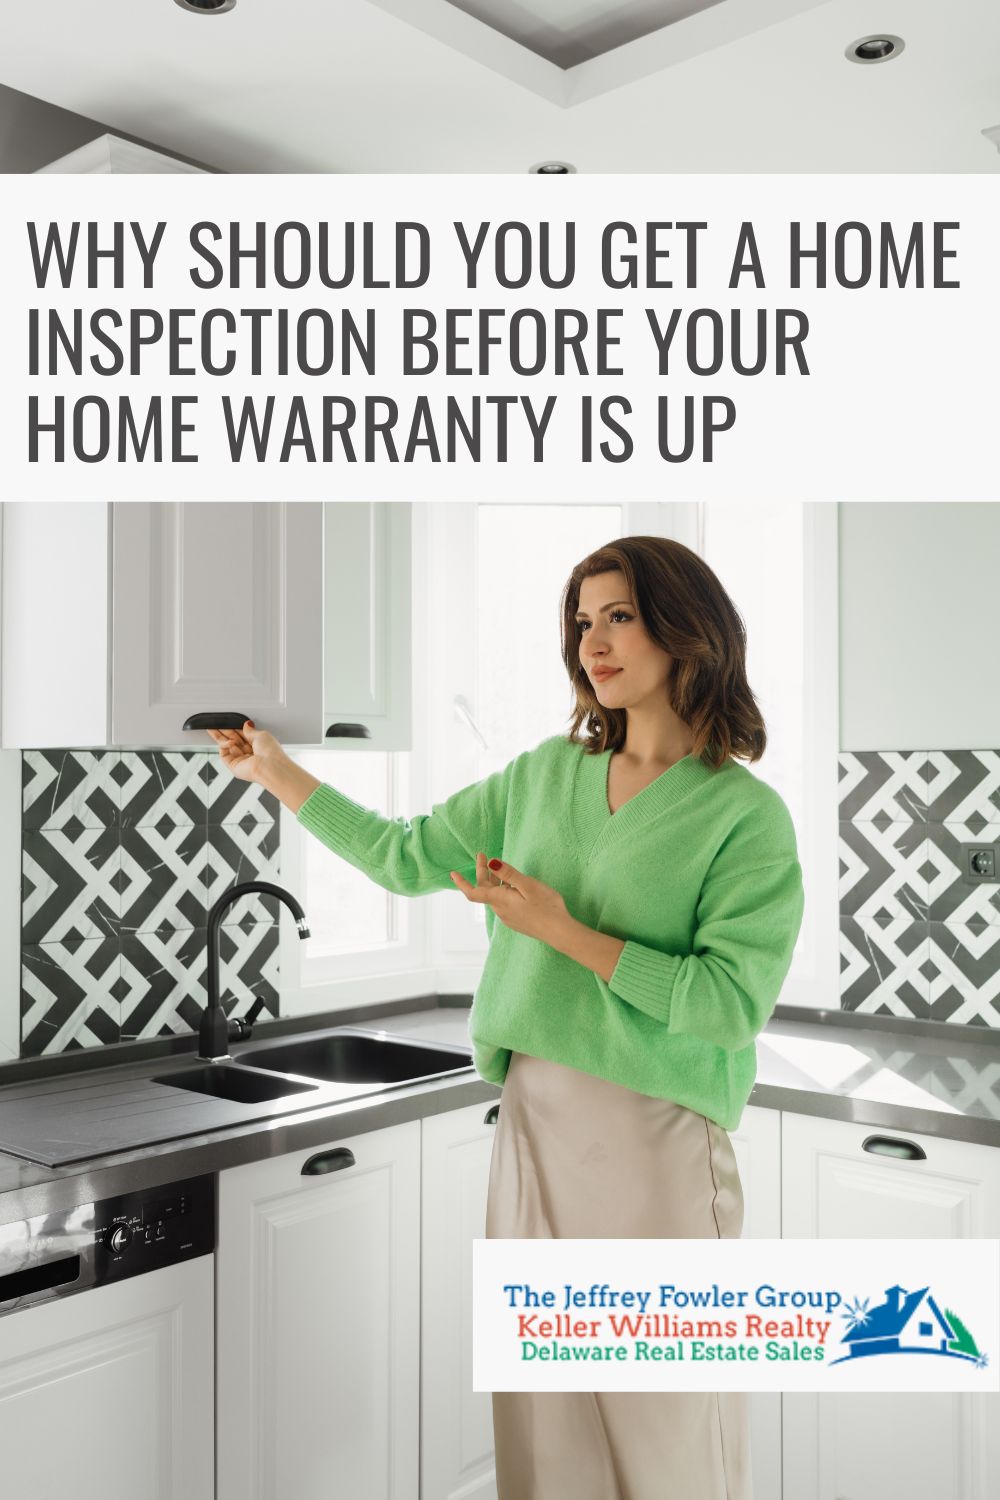 Why Should You Get A Home Inspection Before Your Home Warranty Is Up